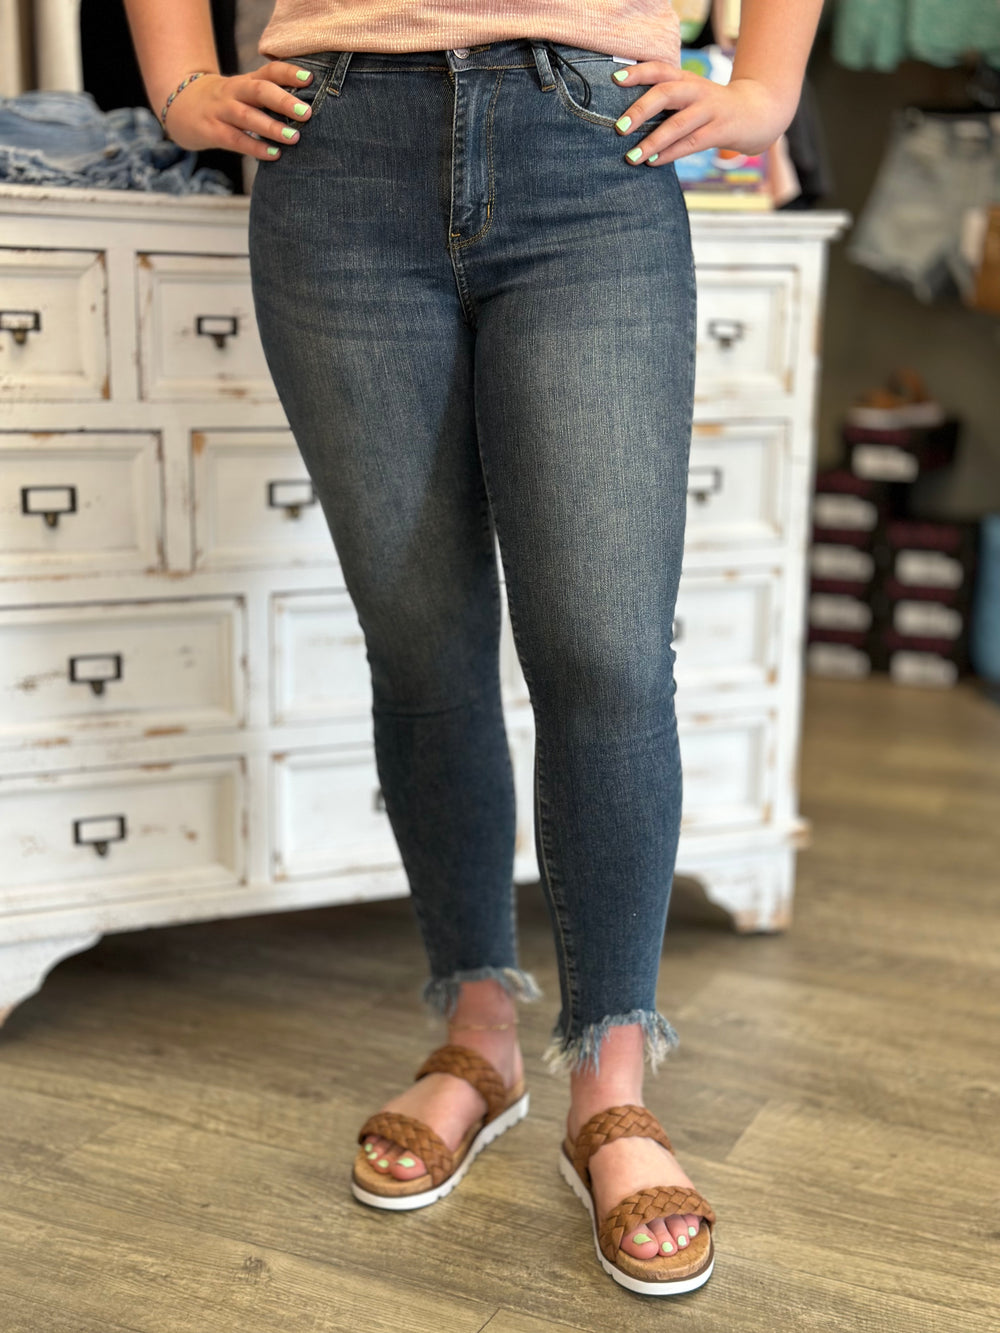 Judy Blue So Timeless Mid Rise Shark Bite Skinny Jeans-Jeans-Judy Blue-Evergreen Boutique, Women’s Fashion Boutique in Santa Claus, Indiana